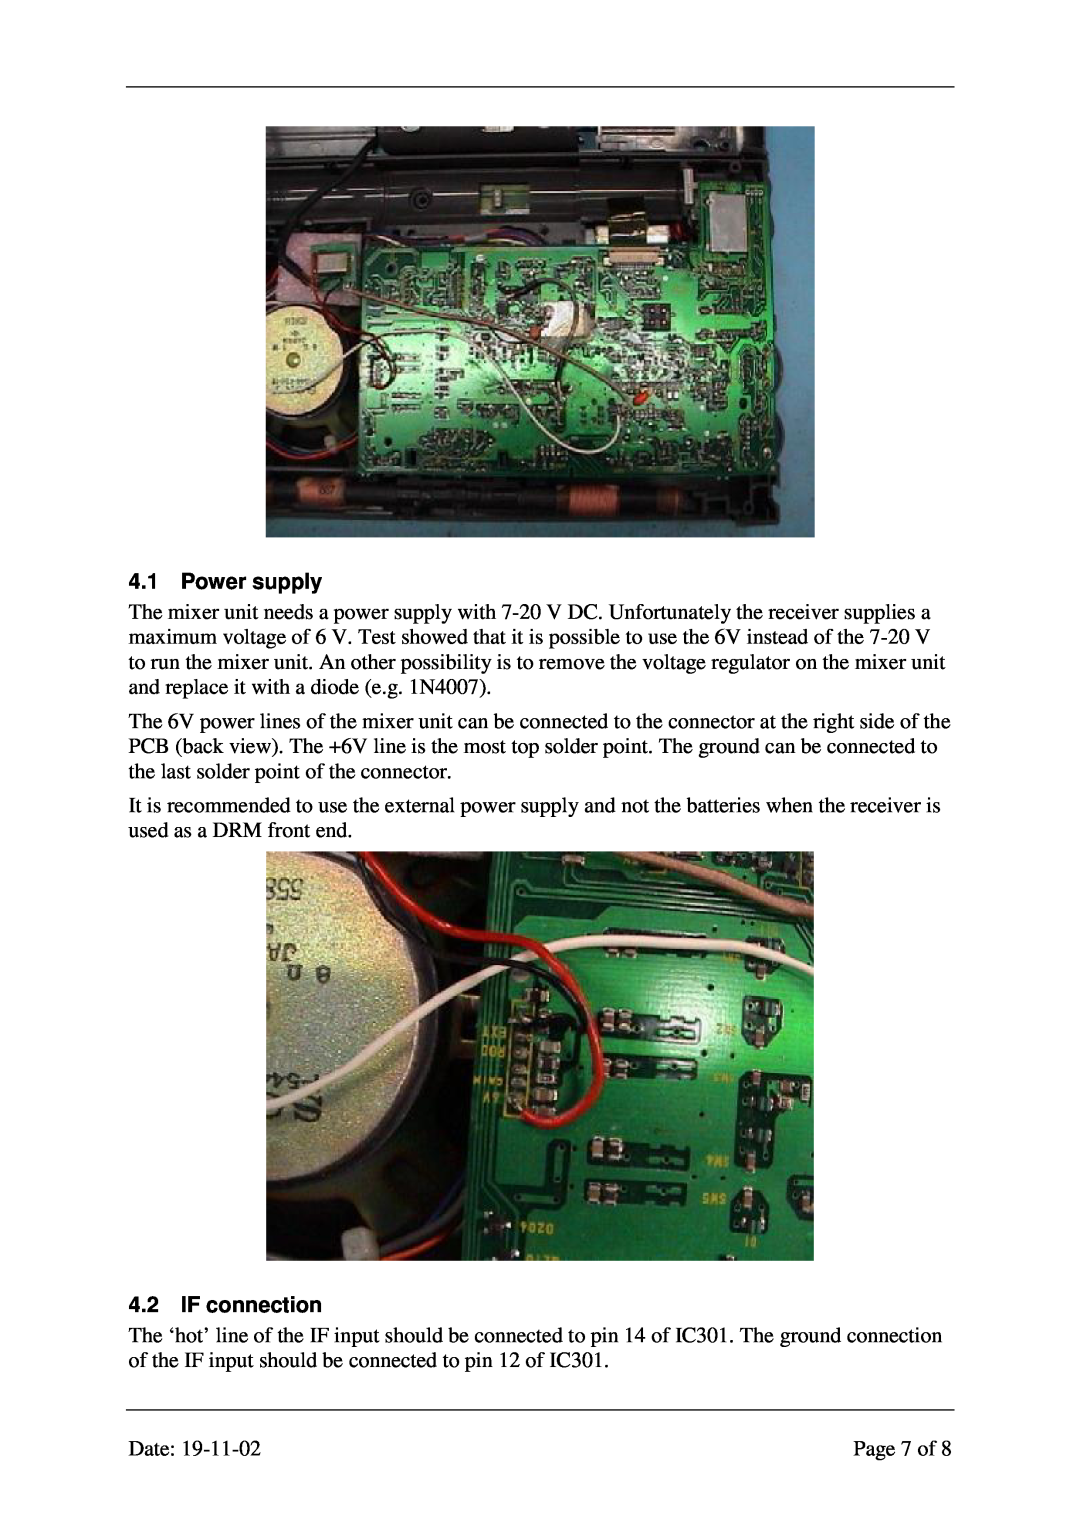 Sony ICF-SW77 manual 4.1Power supply, 4.2IF connection 